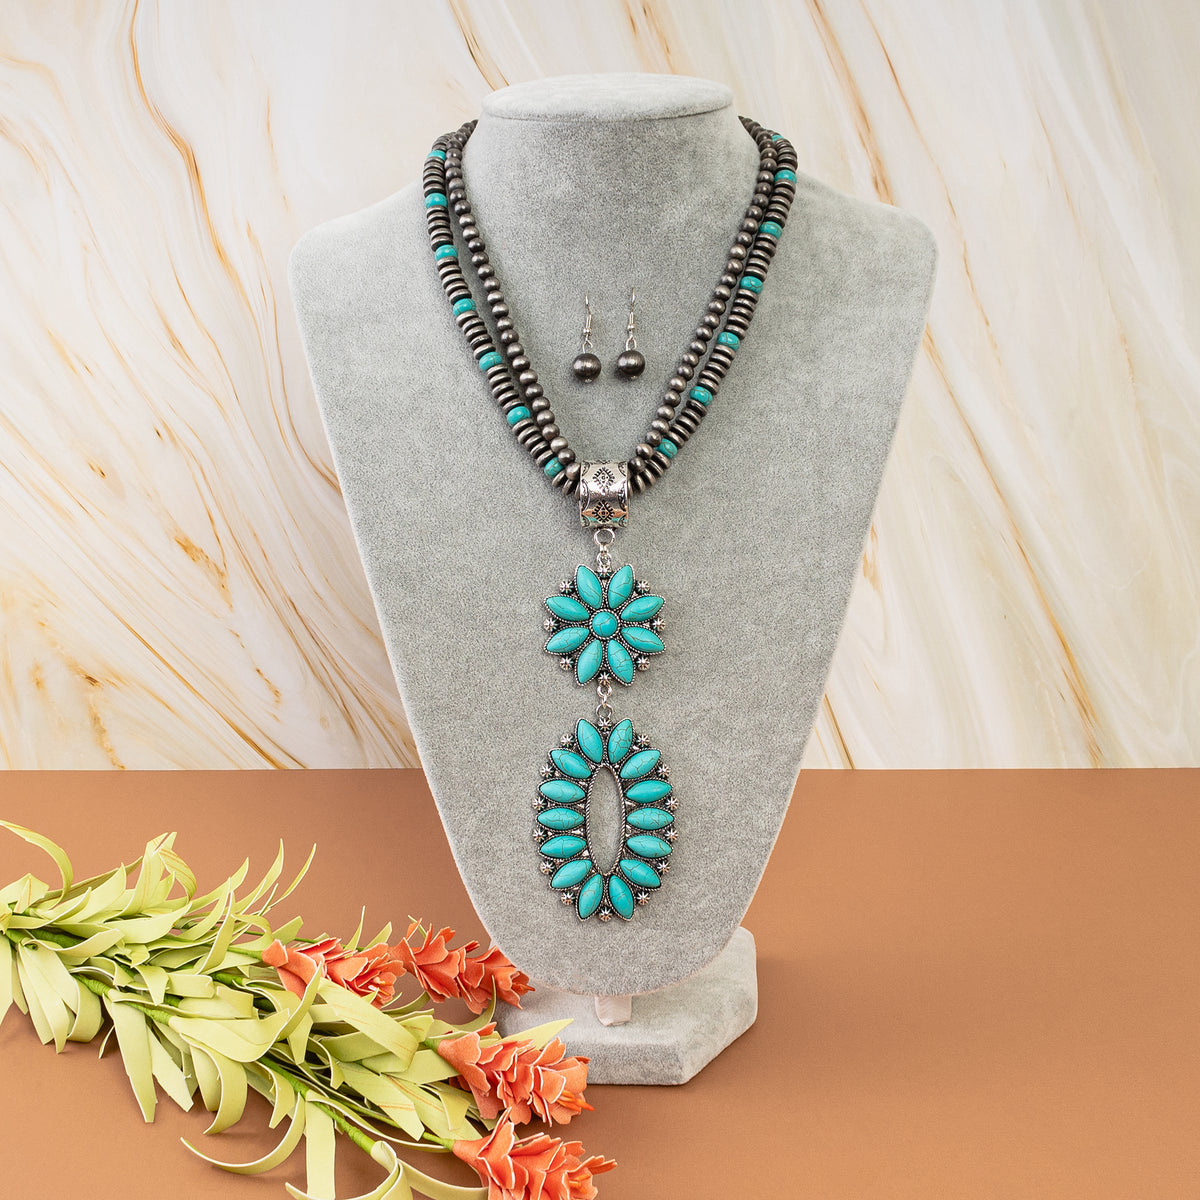 72601 - Western Necklace - Turquoise & Silver - Fashion Jewelry Wholesale